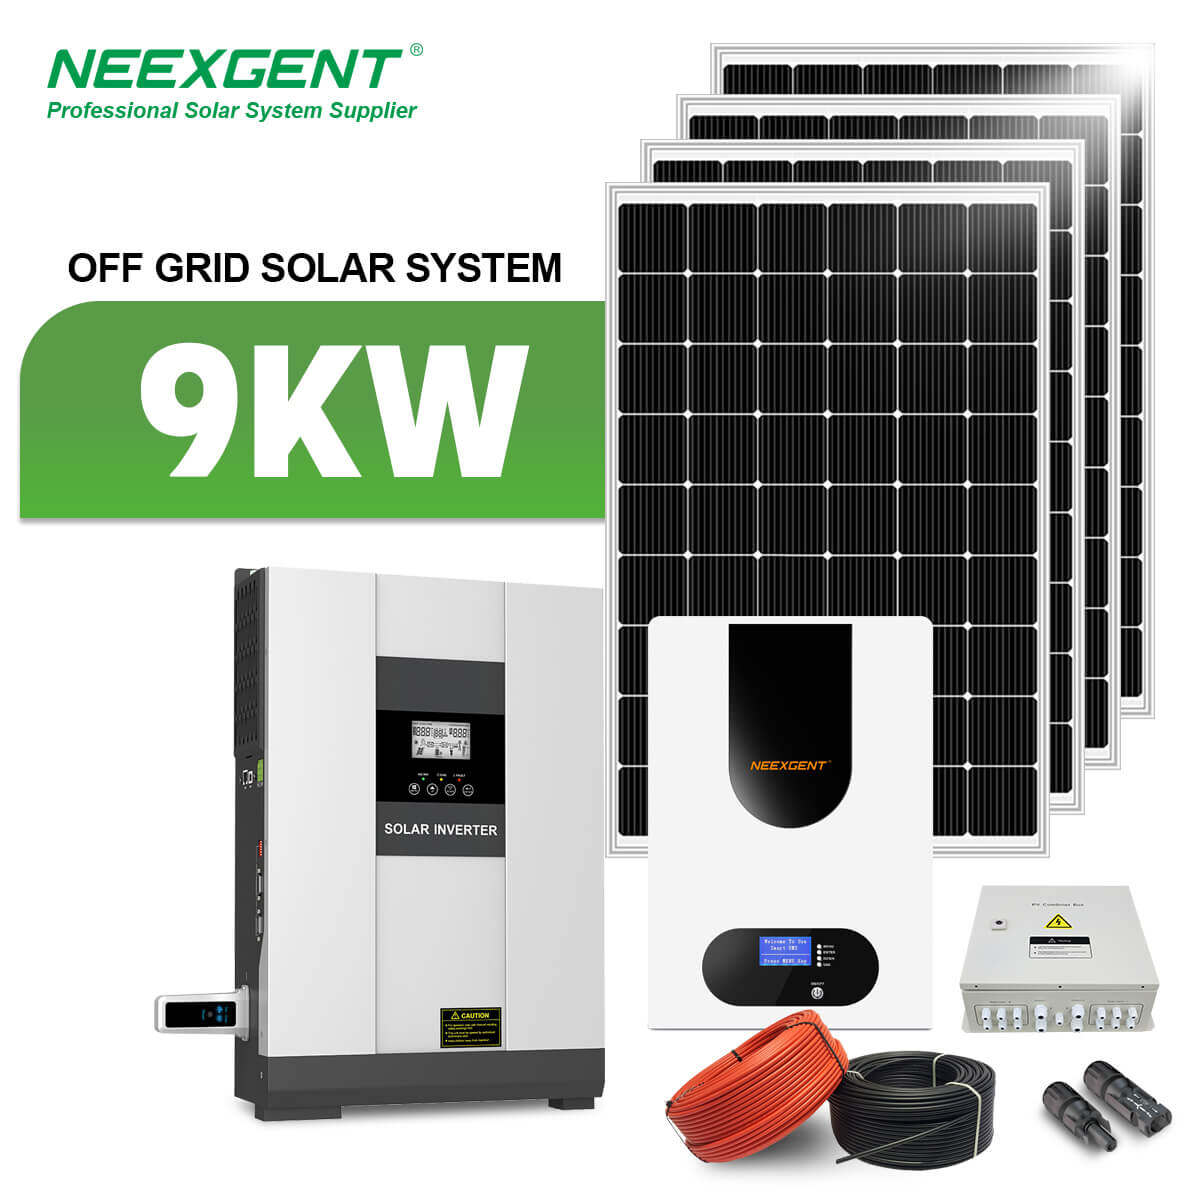 Neexgent Renewable Energy 9kw 3 phase Off-grid Solar System For Small Home With Battery Charger